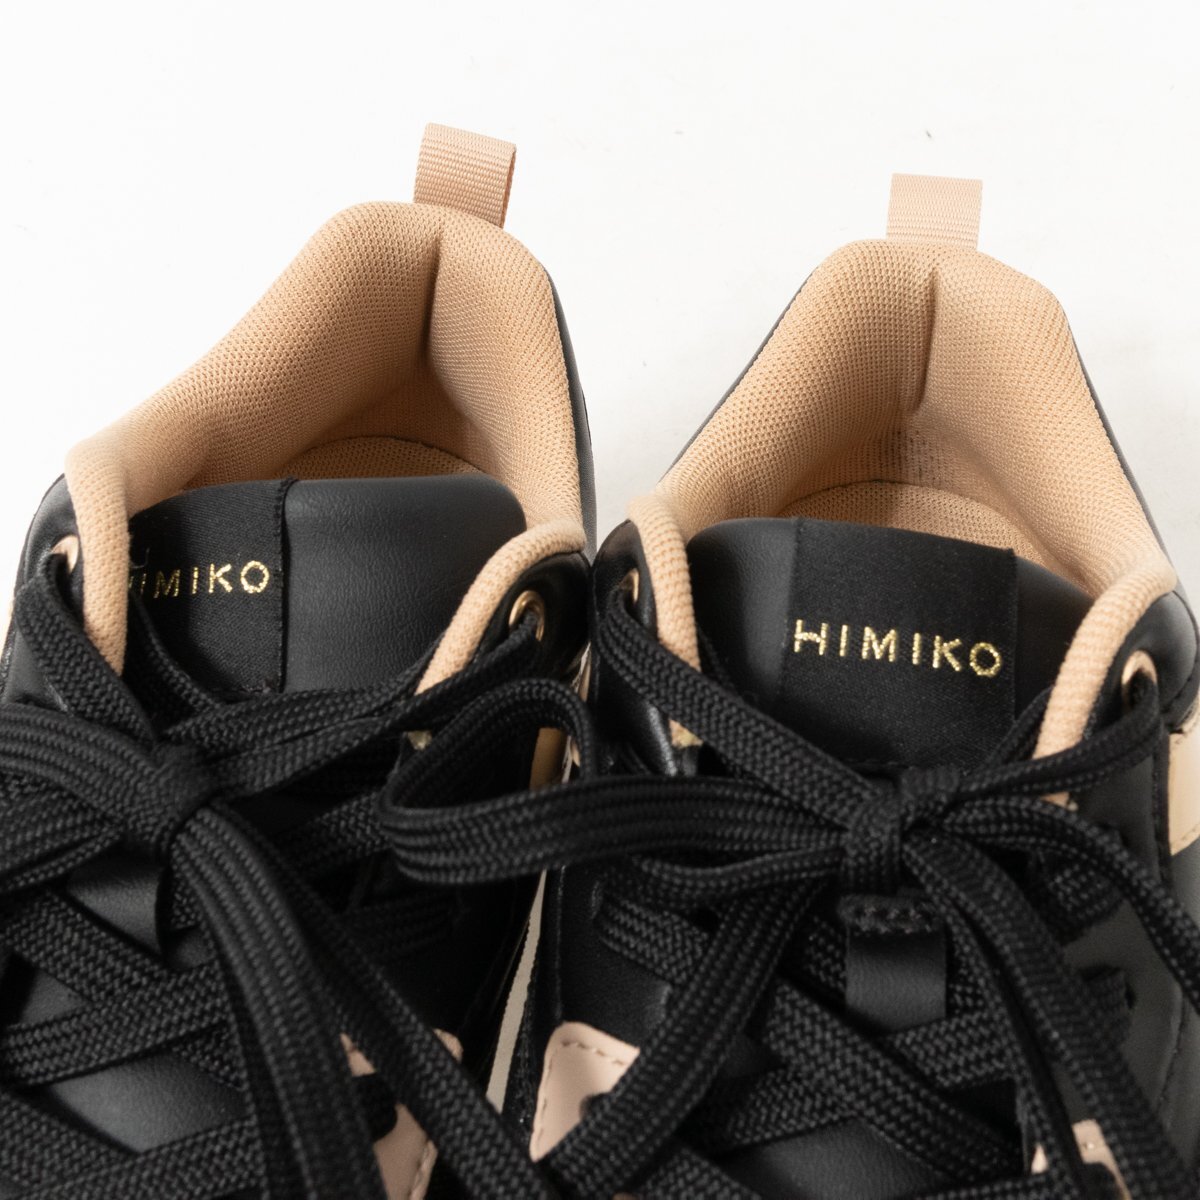  Himiko HIMIKO volume sole sneakers 637101 black gray Brown 23cm water-repellent light weight thickness bottom lame lady's shoes 